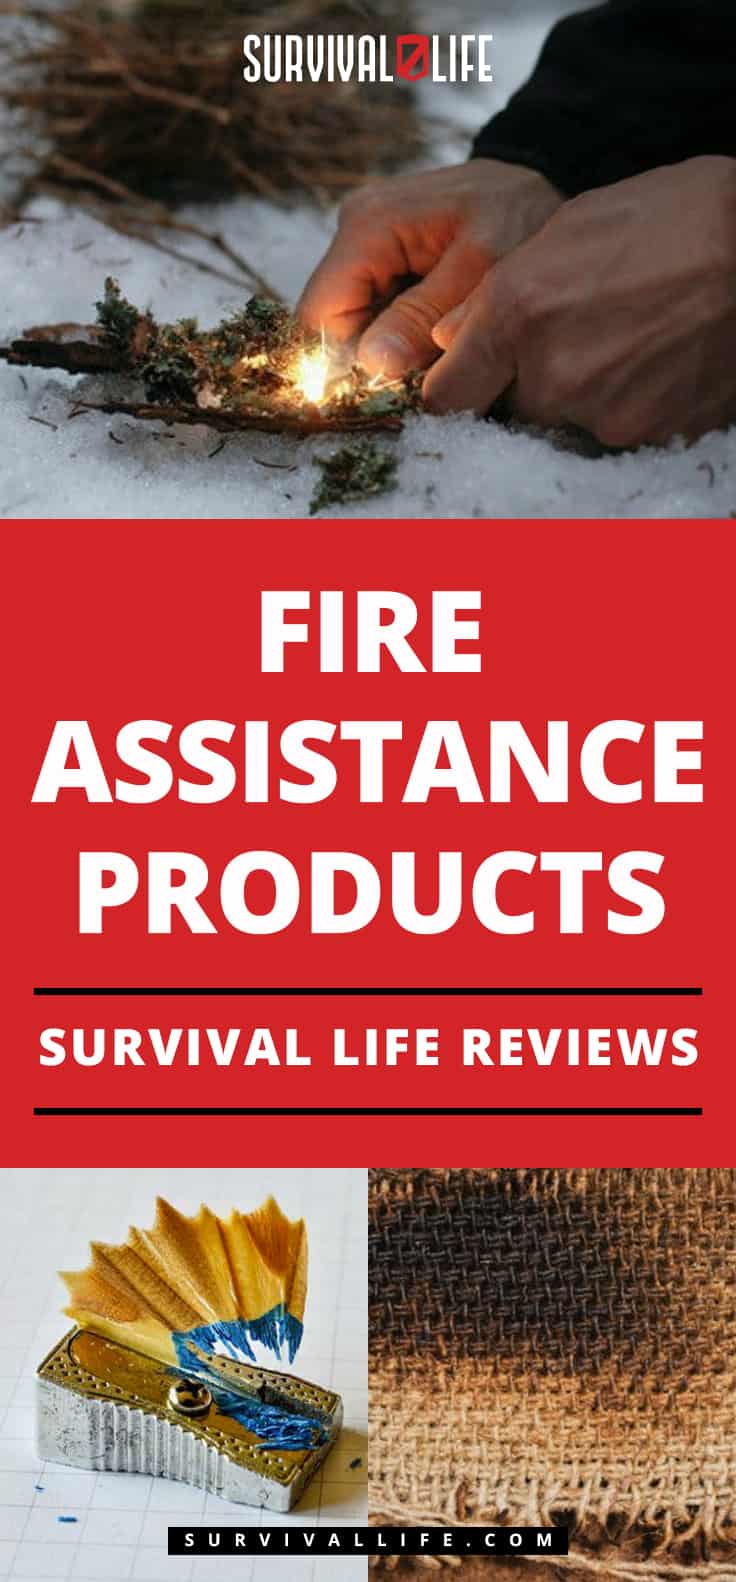 Fire Assistance Products | Survival Life Reviews